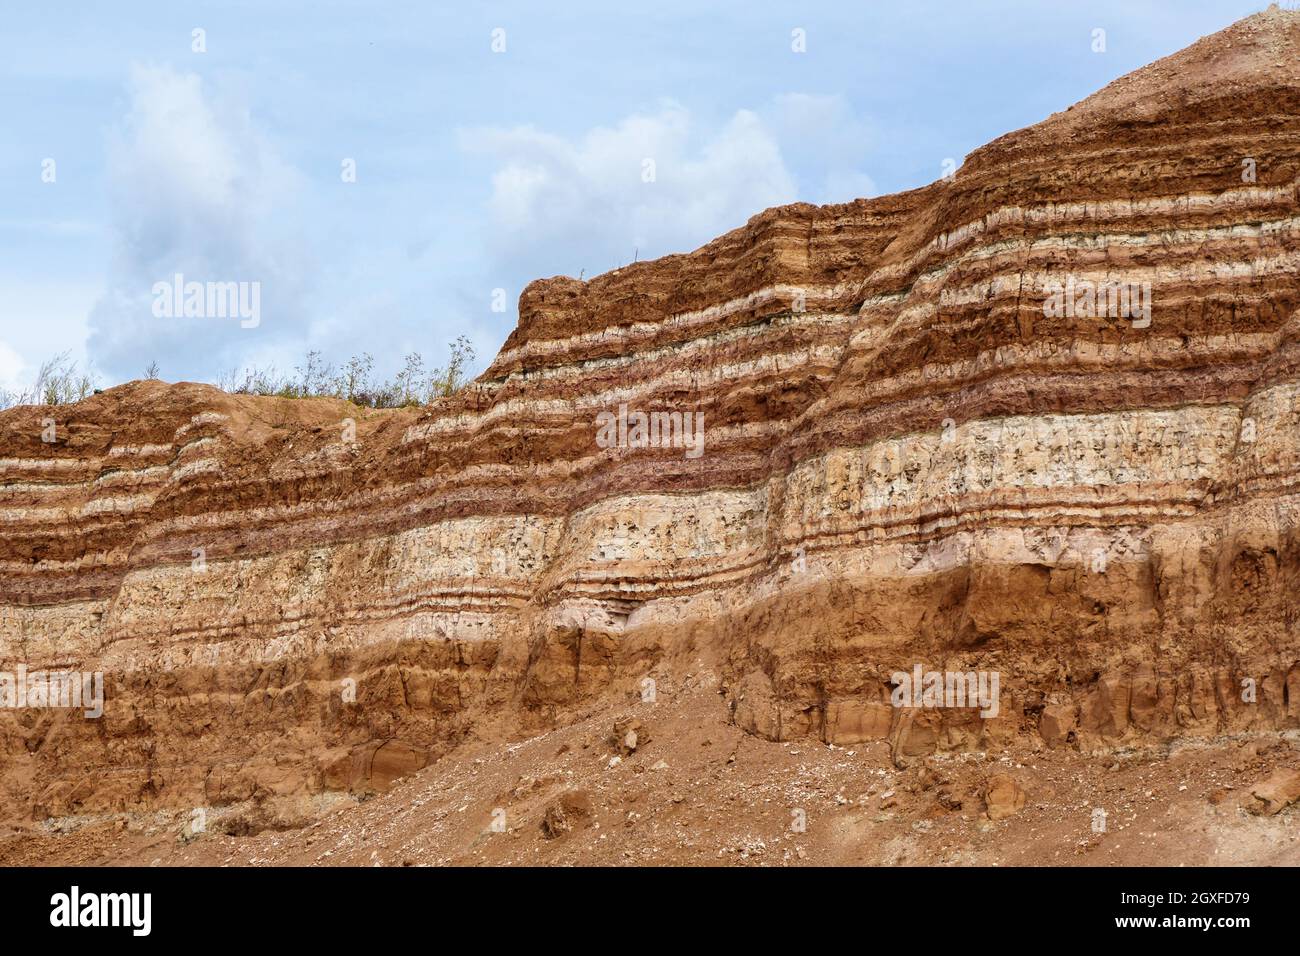 Earth wall in industrial quarry with open-pit mining. It can be seen very clearly underground layers of useful minerals Stock Photo